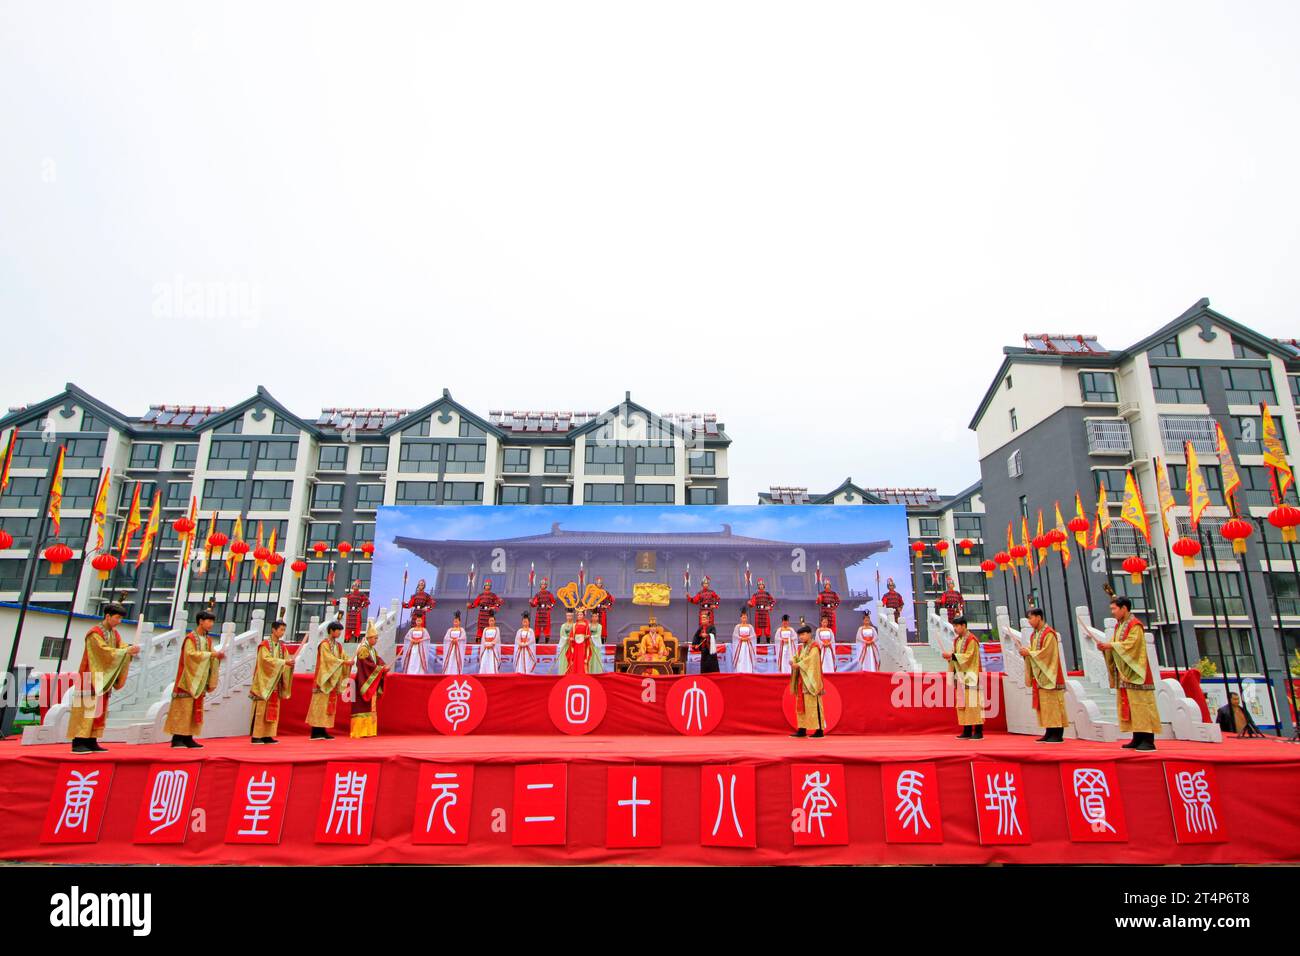 Contea di Luannan - settembre 29: Ancient Chinese Court Life Show in the Street, Luannan County, Hebei, Cina, settembre 29, 2015. Foto Stock